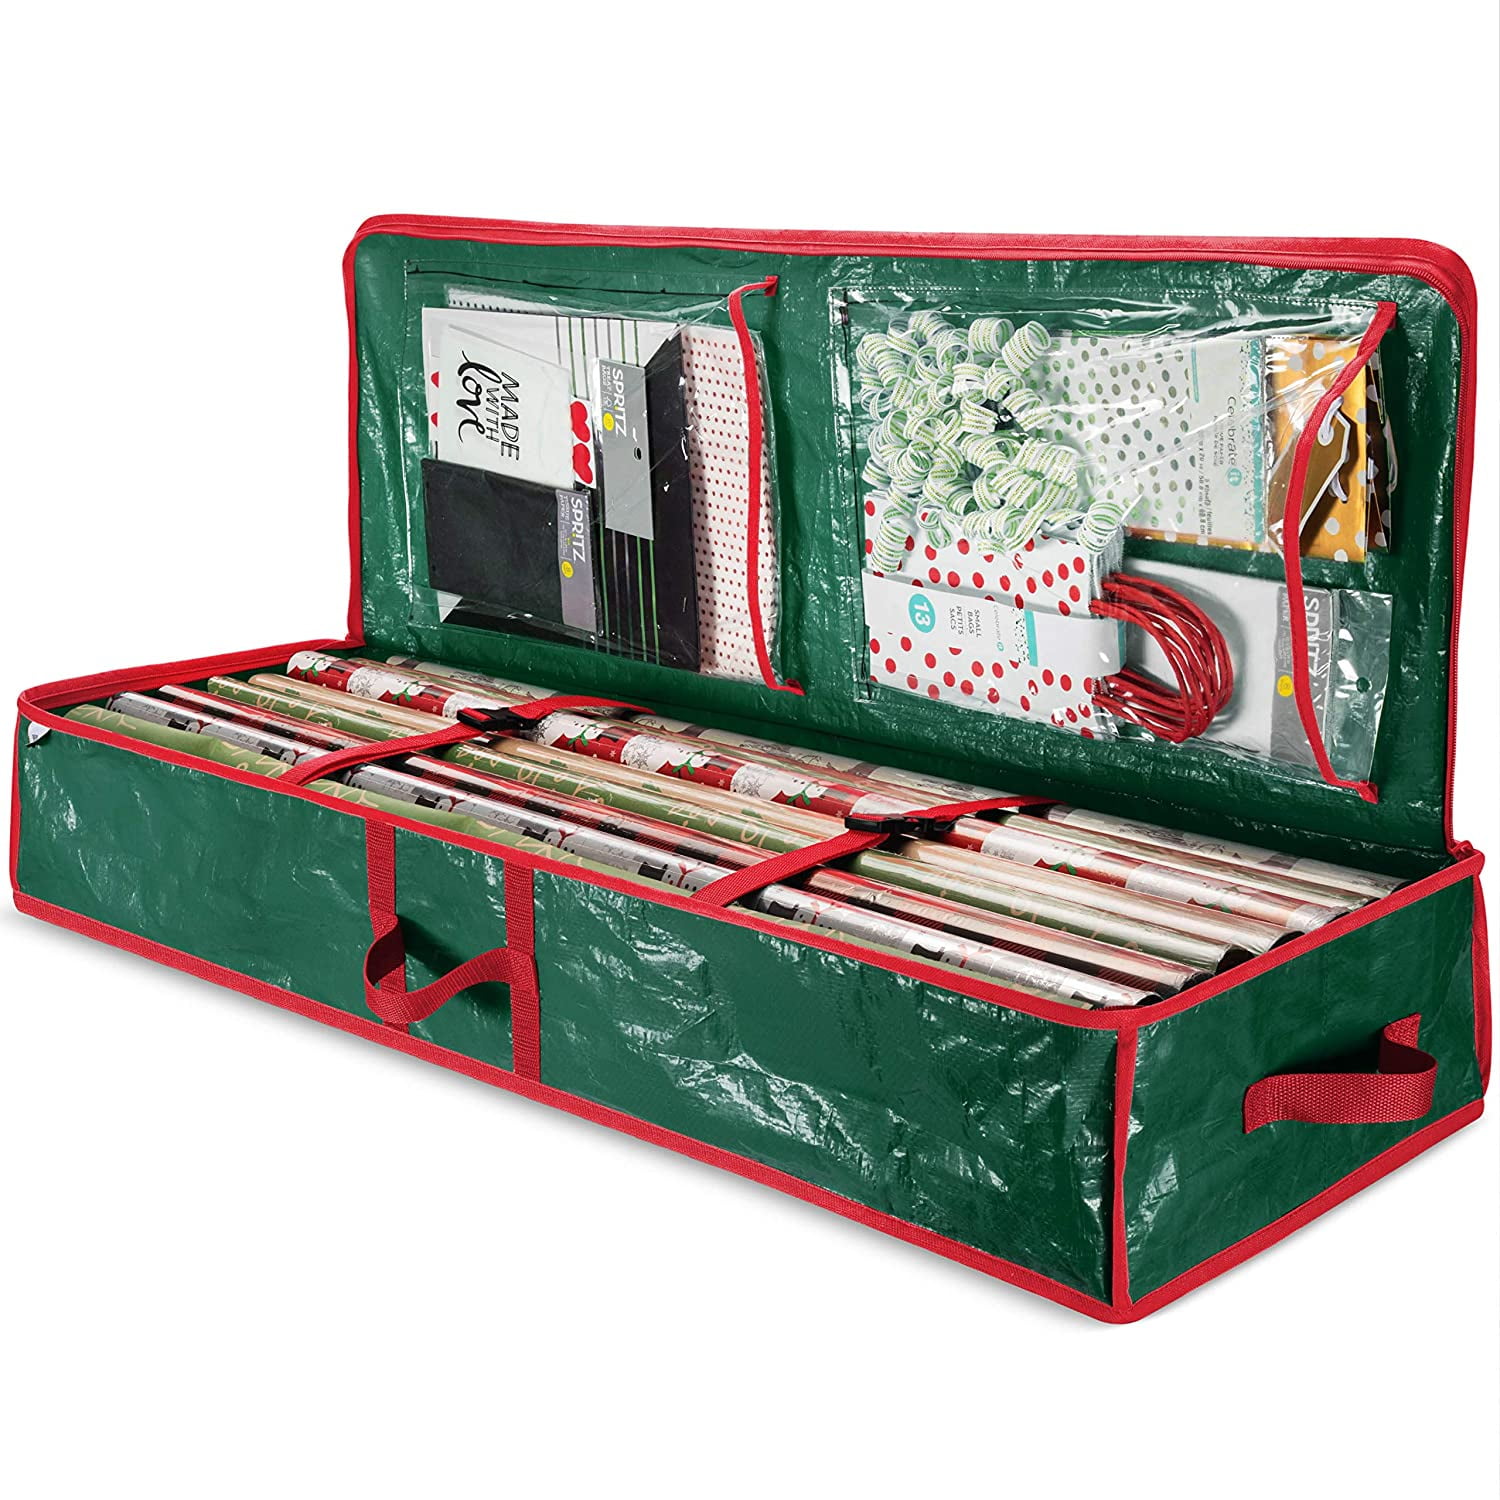 Hearth & Harbor Wrapping Paper Storage Organizer Container - Christmas Wrapping Paper Rolls Storage, Under-Bed Storage Box for Holiday Storage 